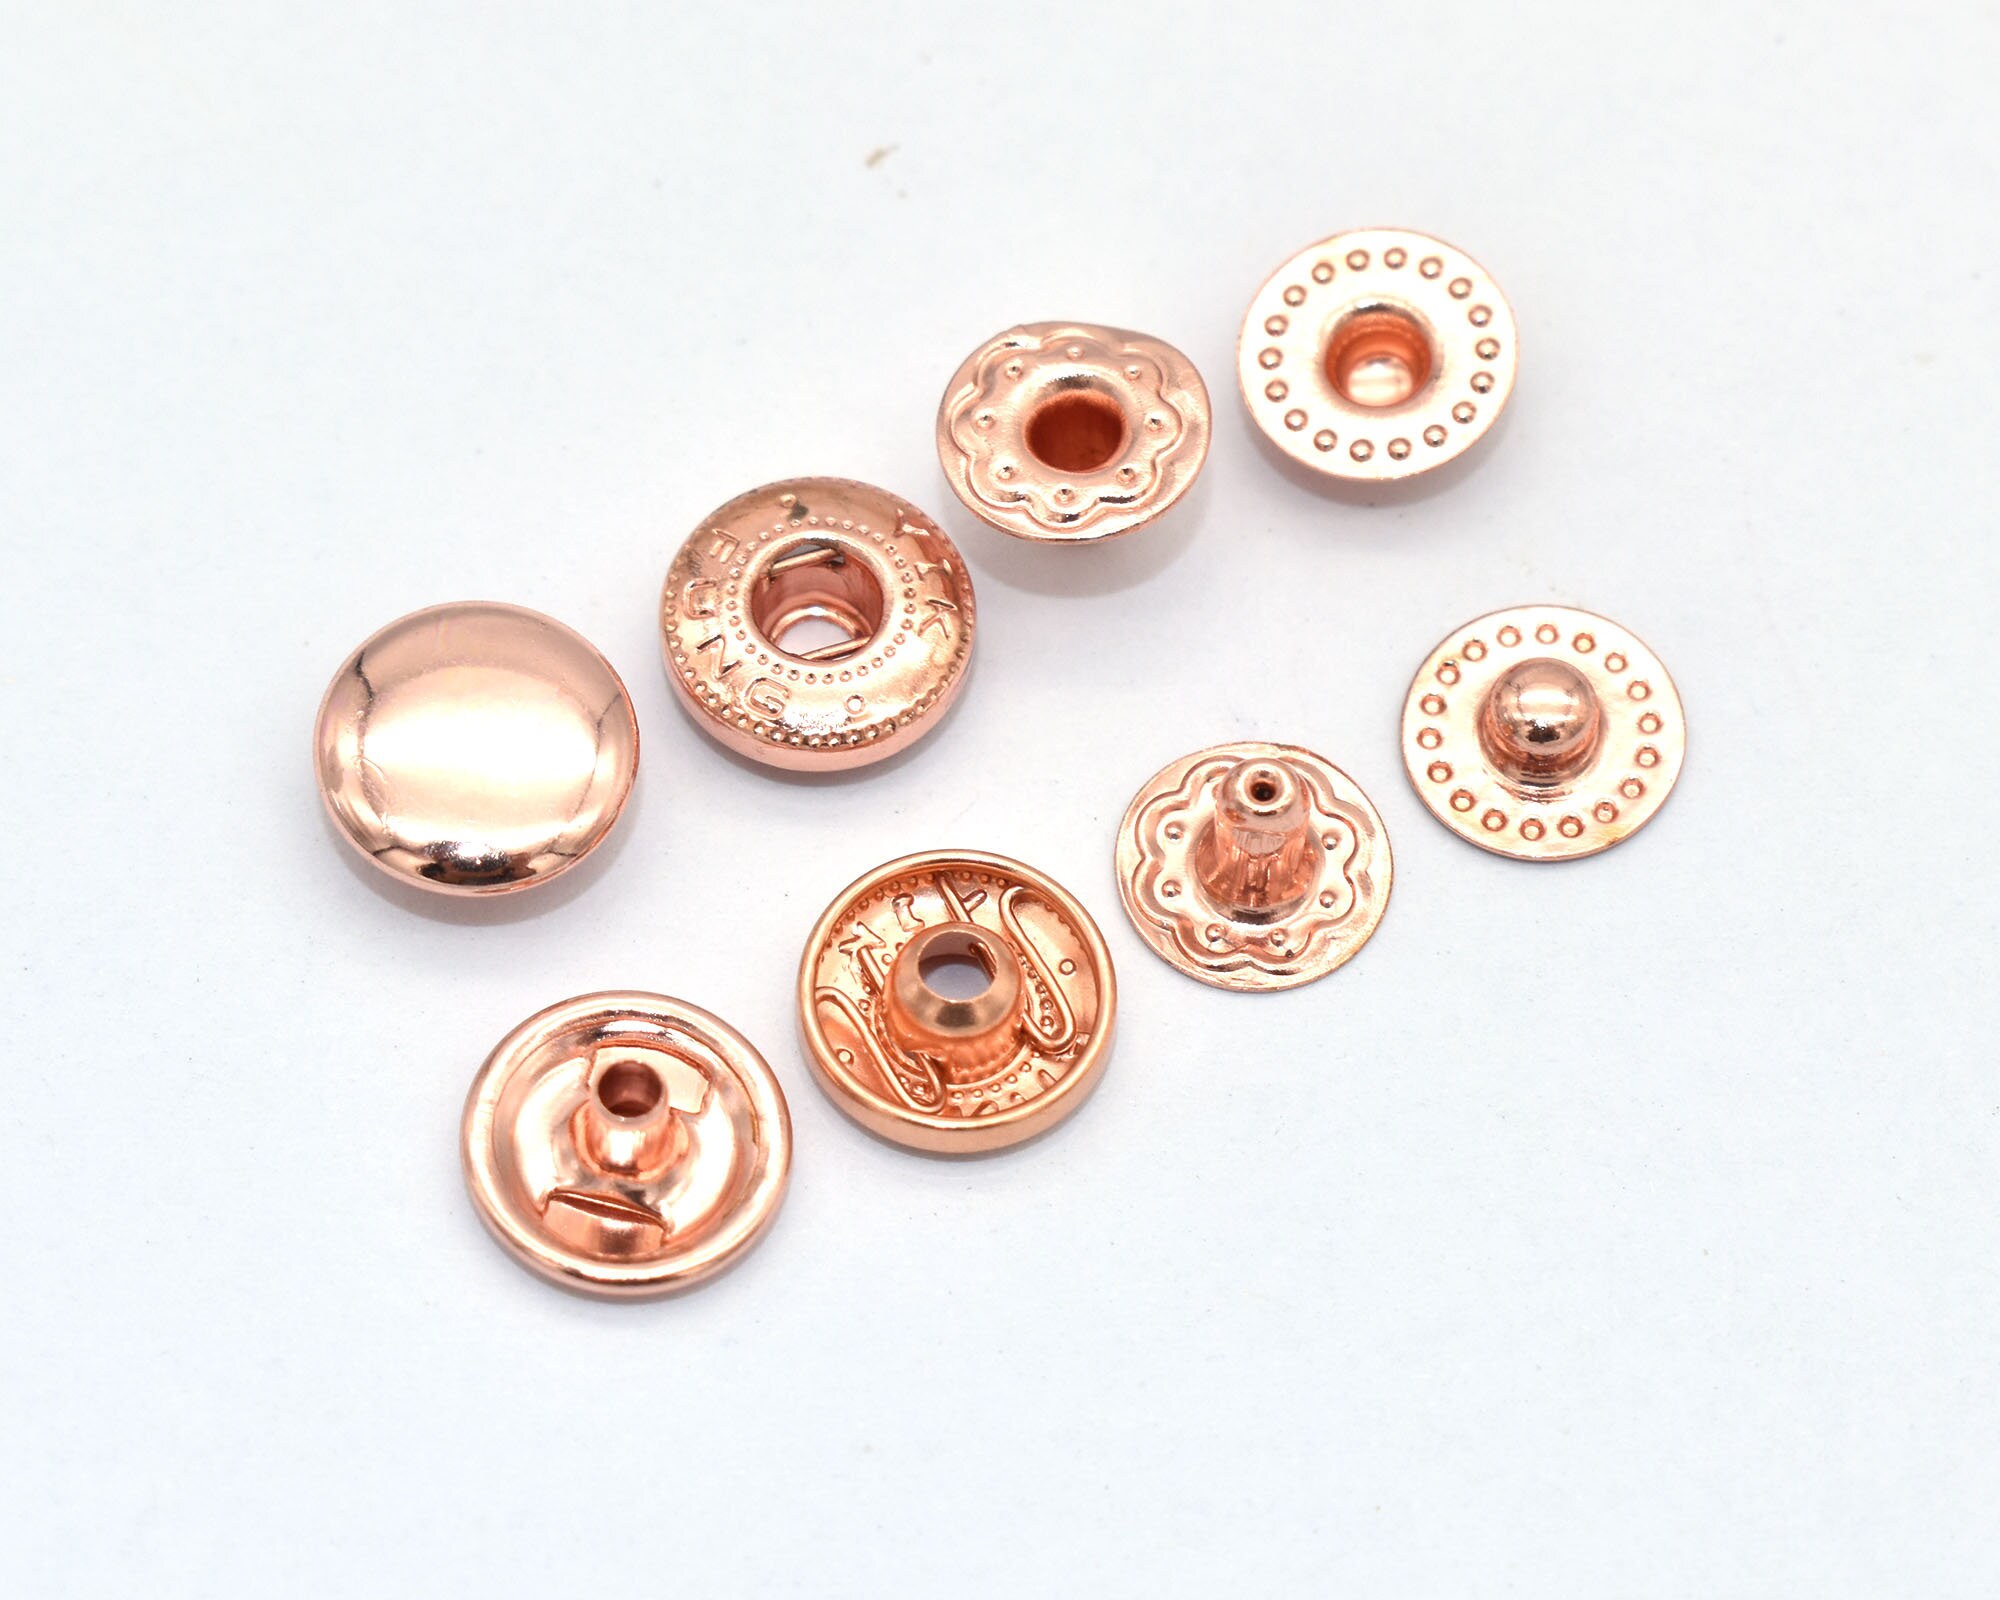 Metal Leather Snap Buttons - 12mm Spring Snap Fasteners Kit Press Studs  Clothing Snaps Button for Clothing Canvas Leather Craft Sewing 20sets  (Bronze)